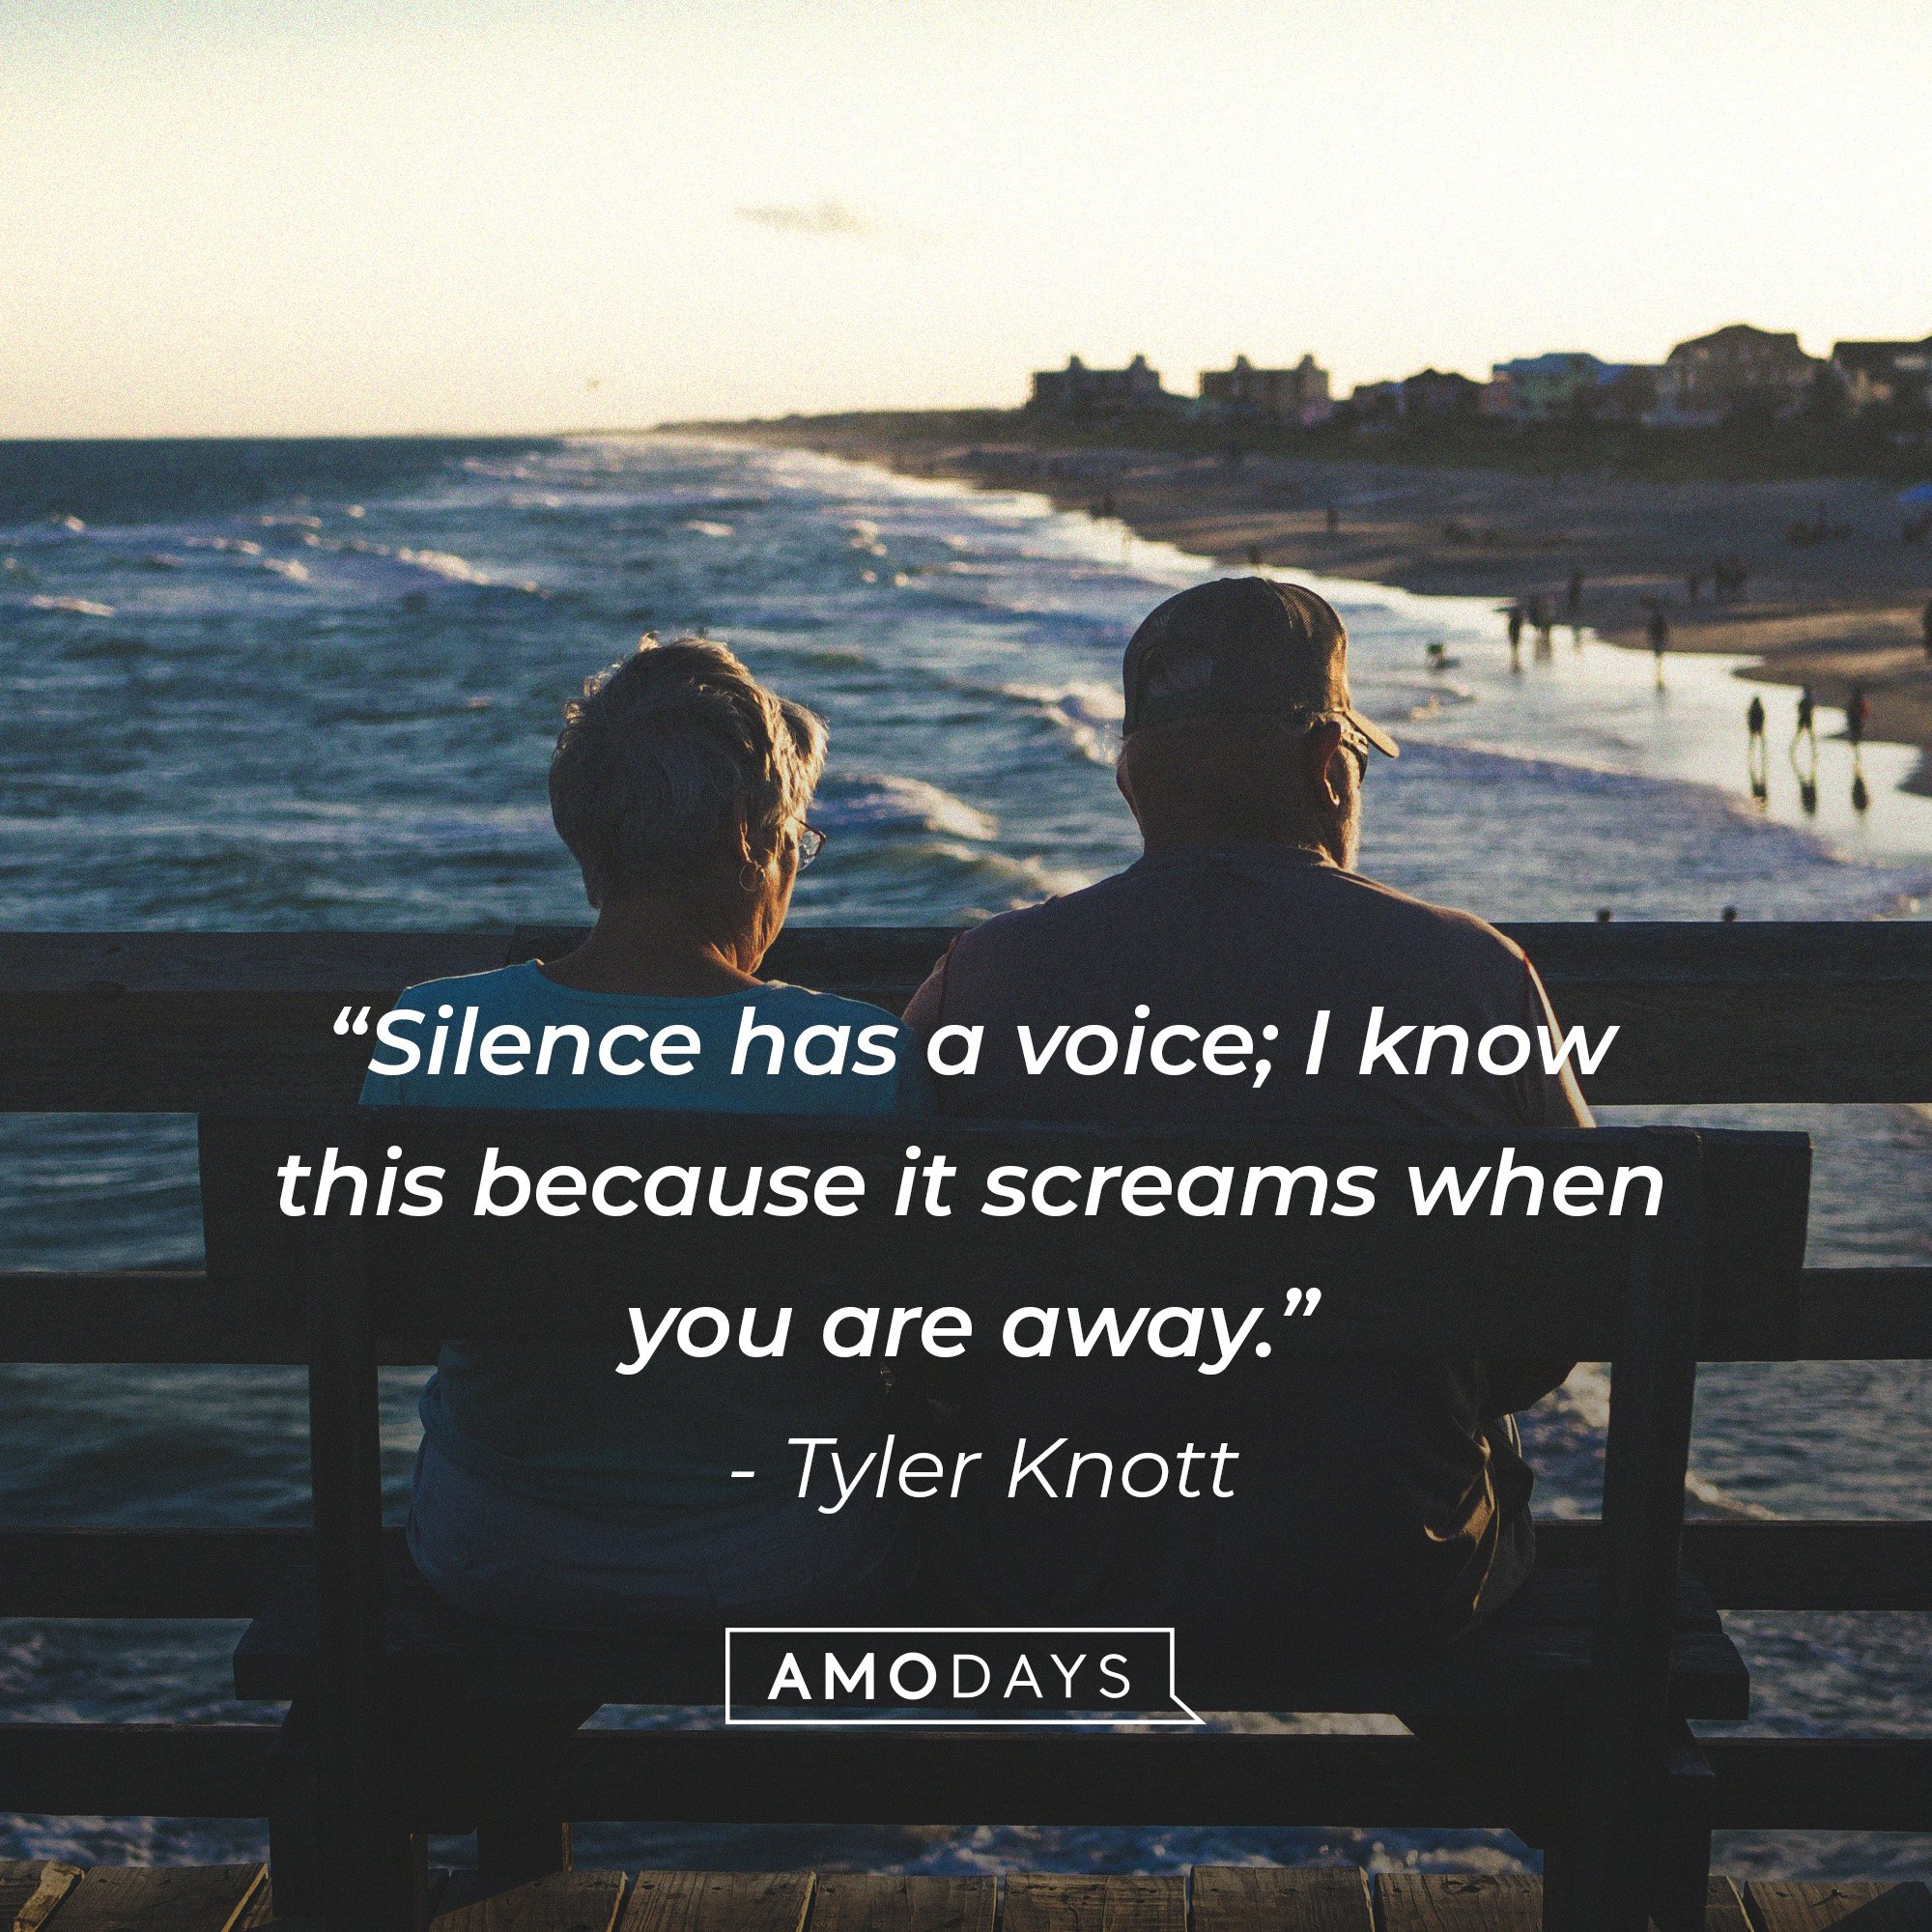 Tyler Knott's quote: “Silence has a voice; I know this because it screams when you are away.” | Image: AmoDays